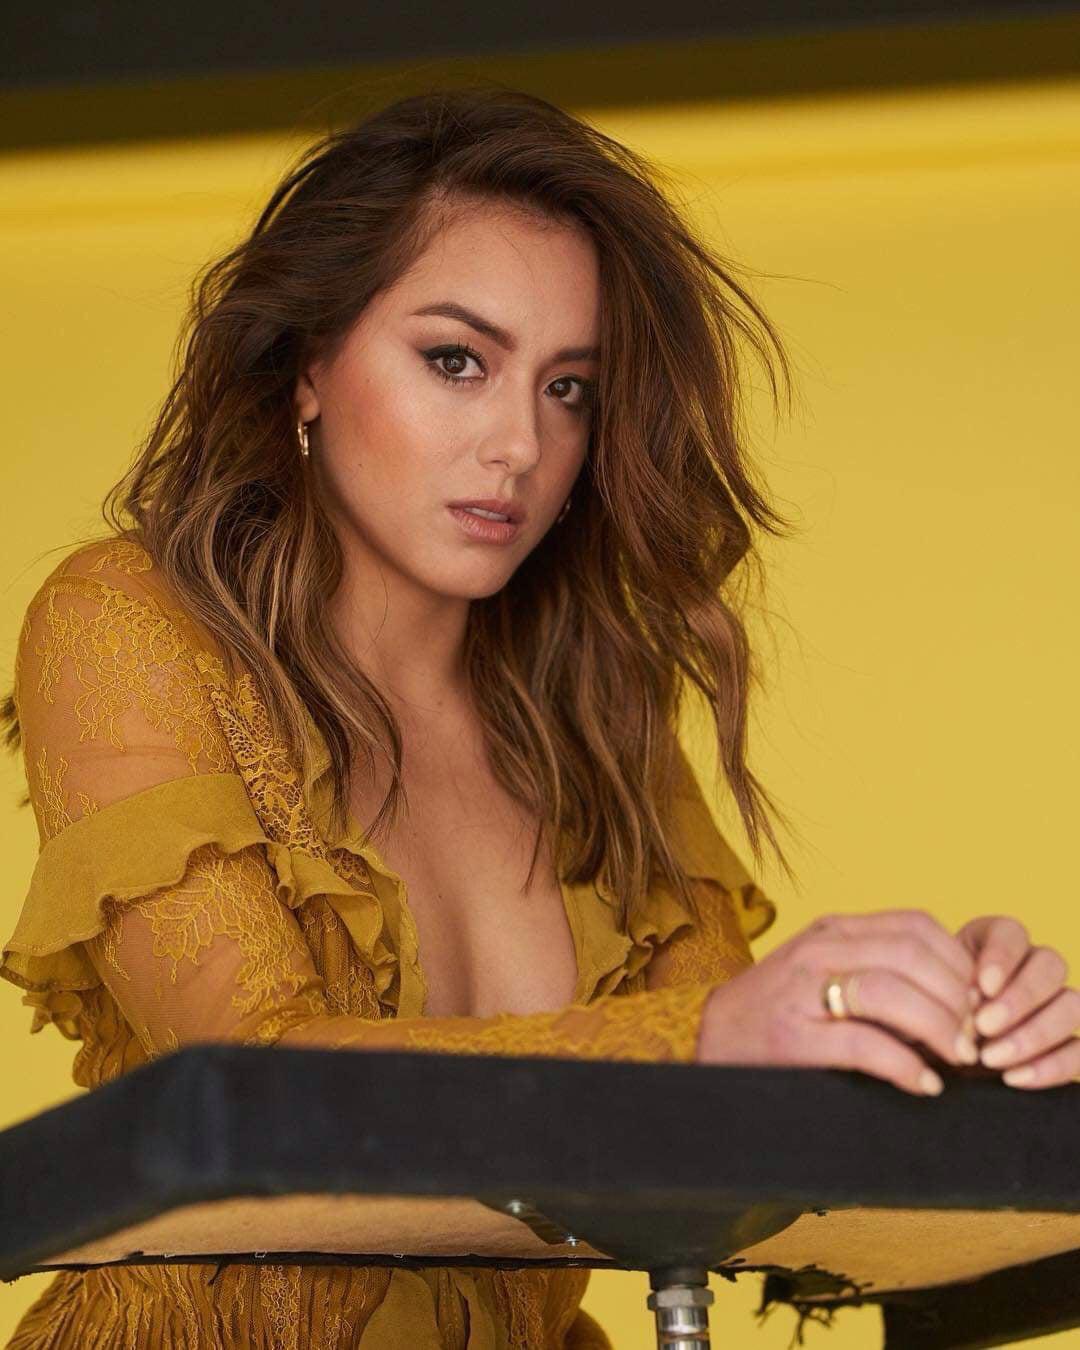 Chloe Bennet needs to be covered in cum